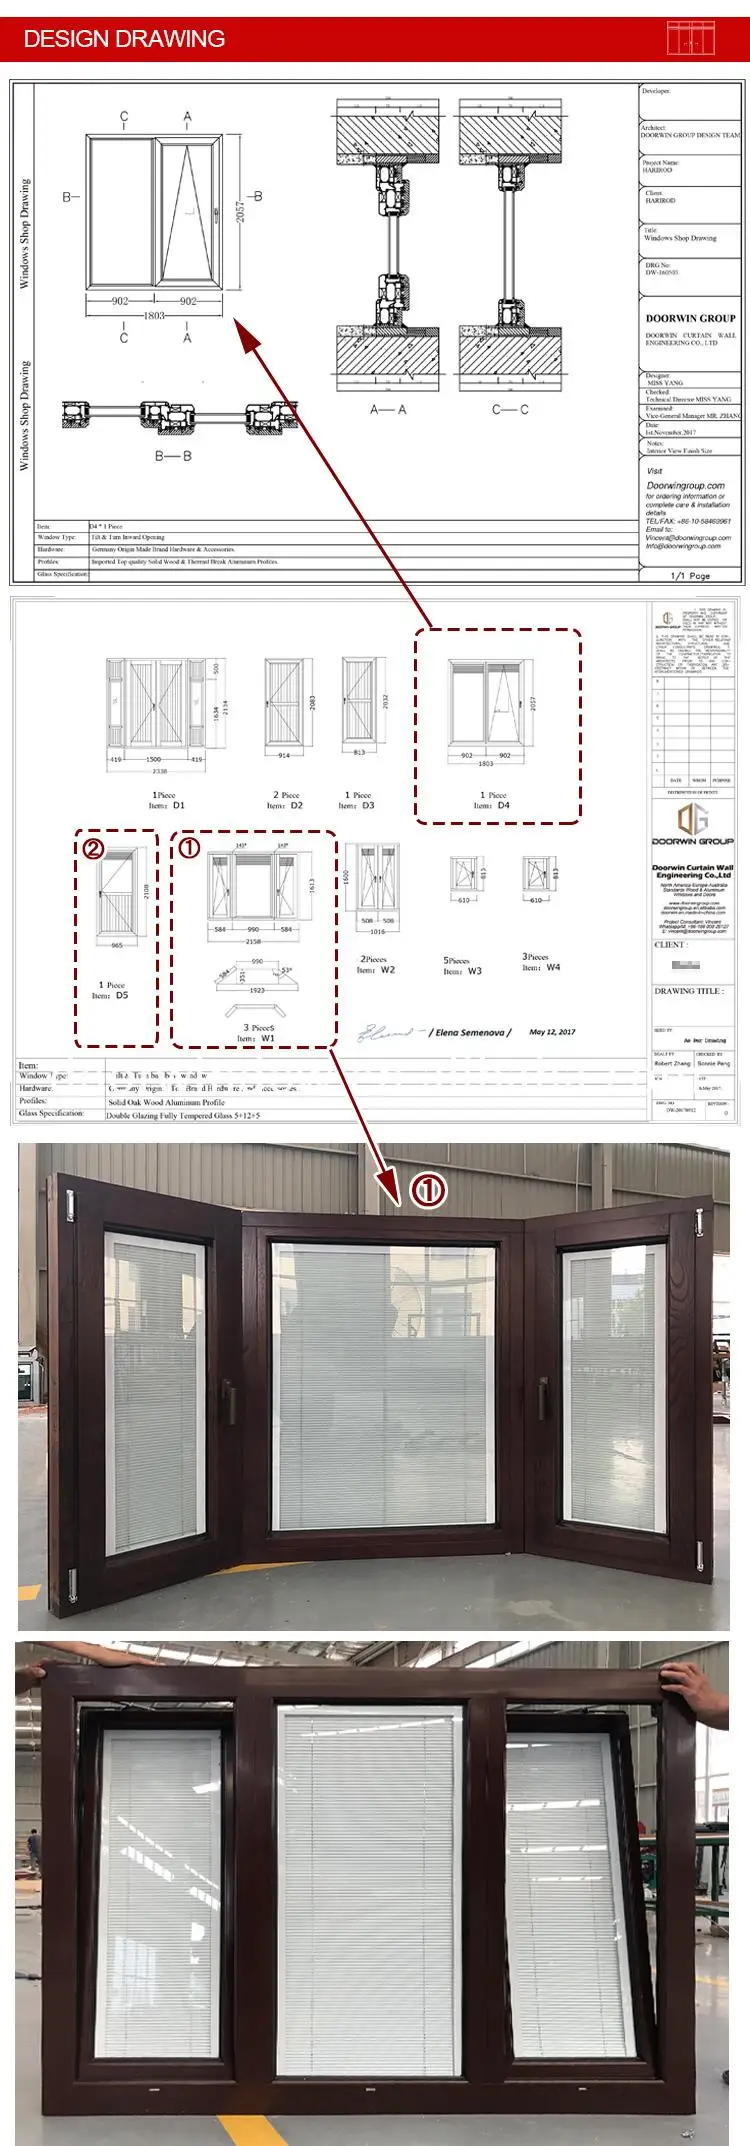 Hot selling the sliding door tempered glass price frosted